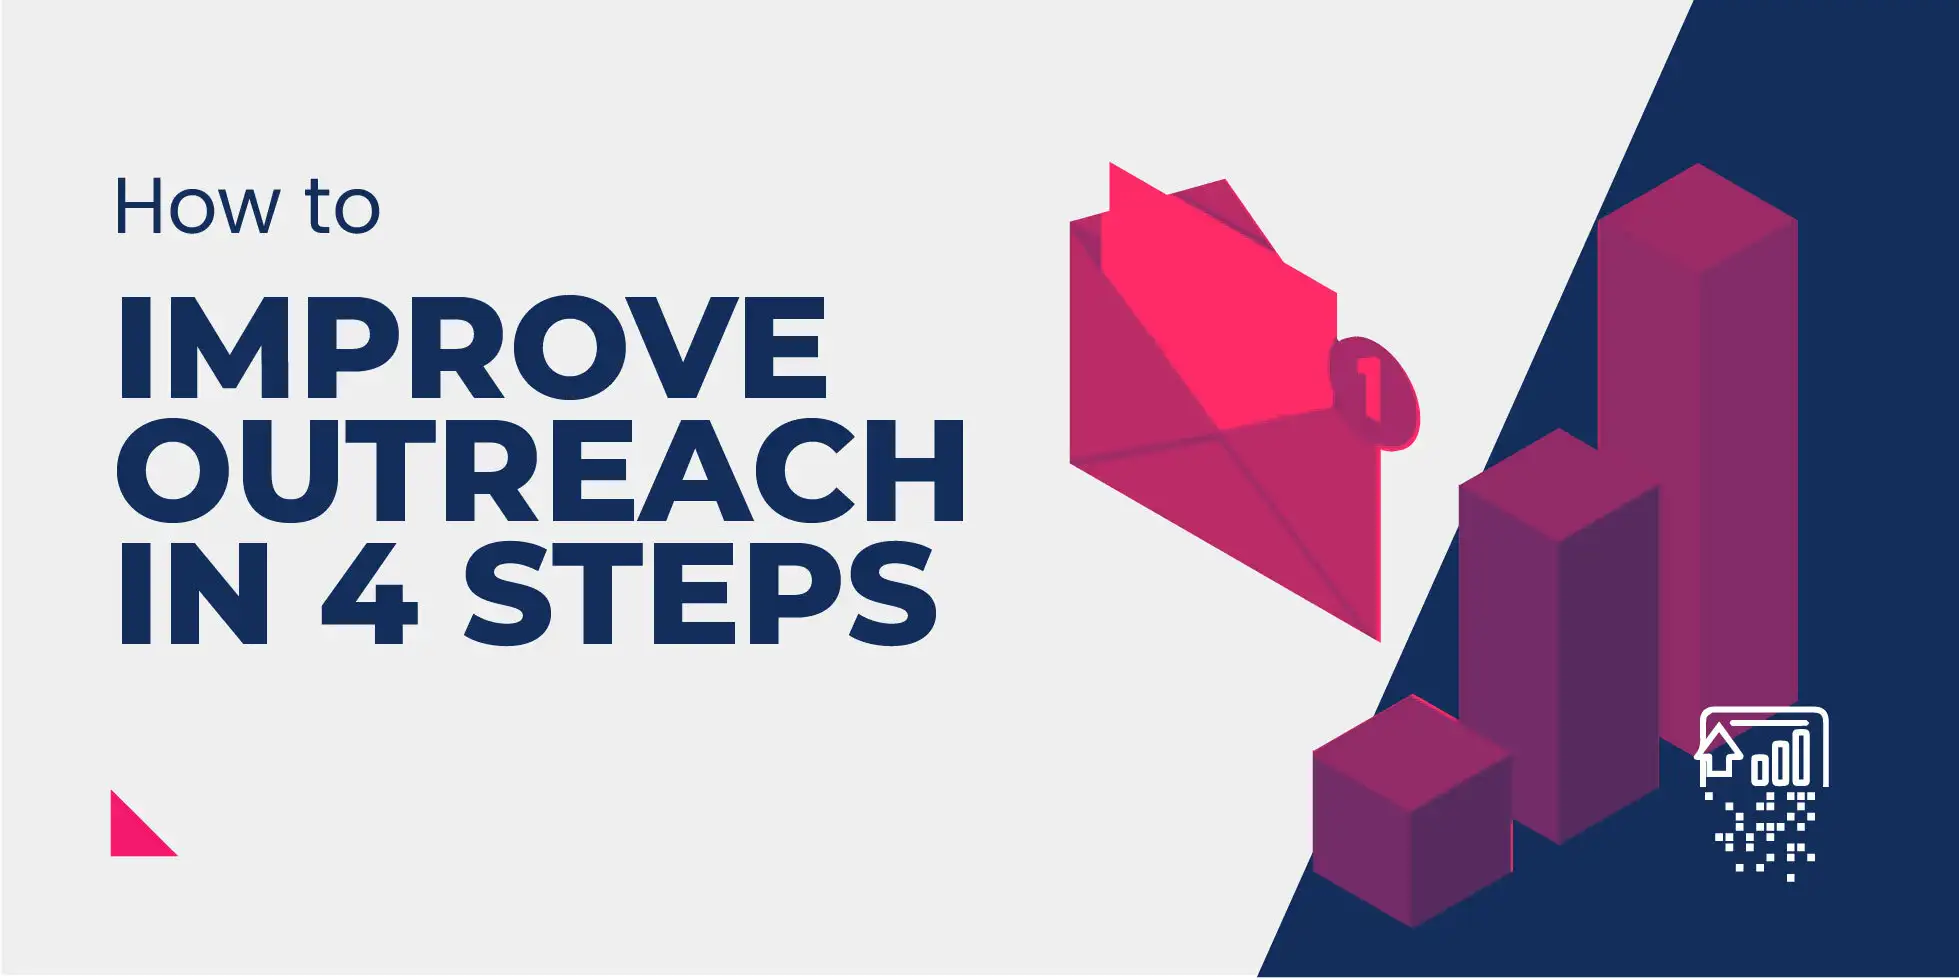 How to Improve Outreach in 4 Steps